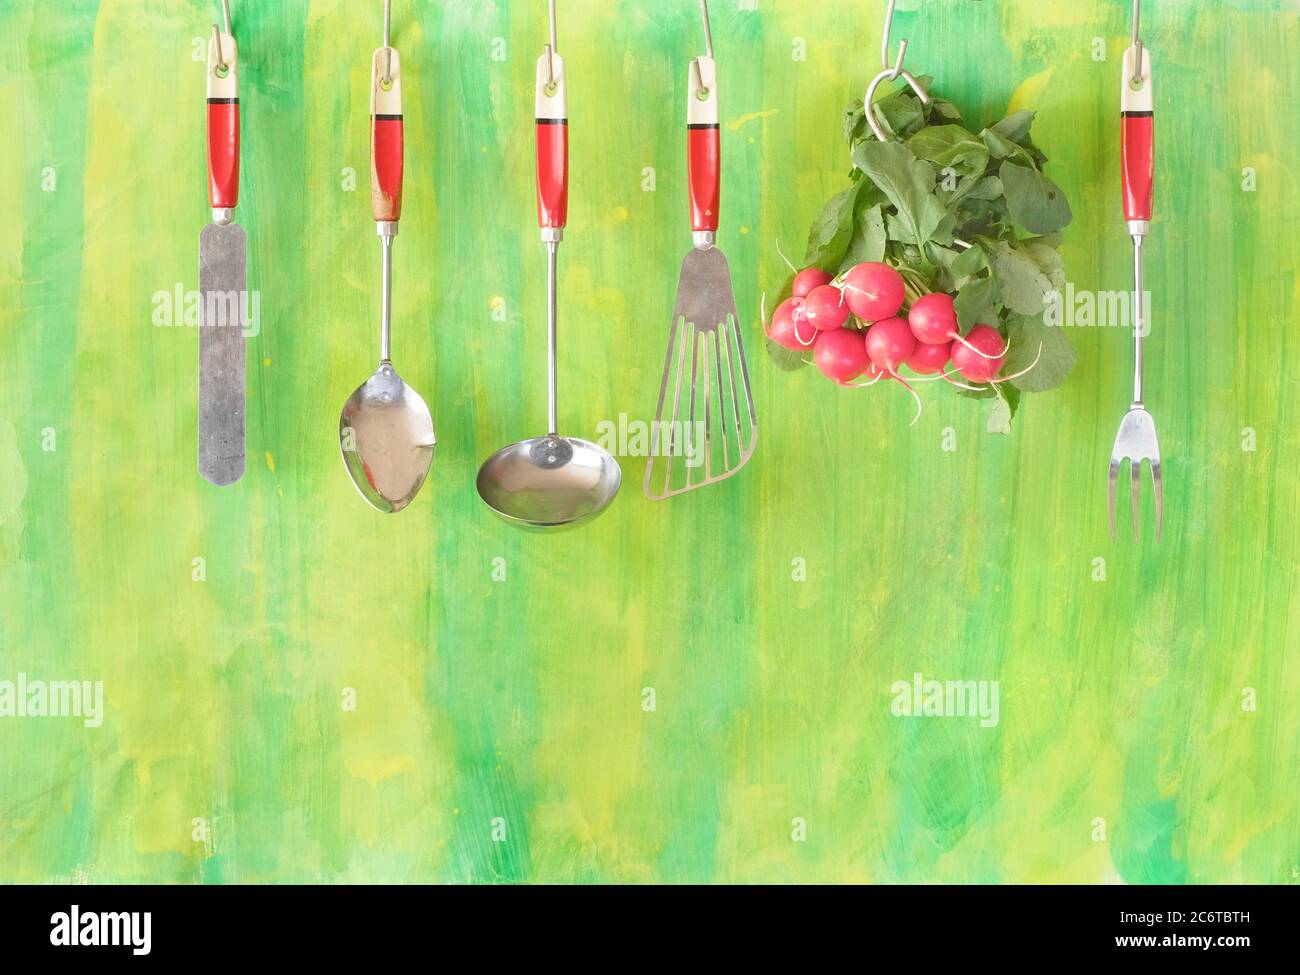 a bunch of fresh radish and hanging vintage kitchen utensils , helathy eating,vegetarian,cooking concept, free copy space Stock Photo